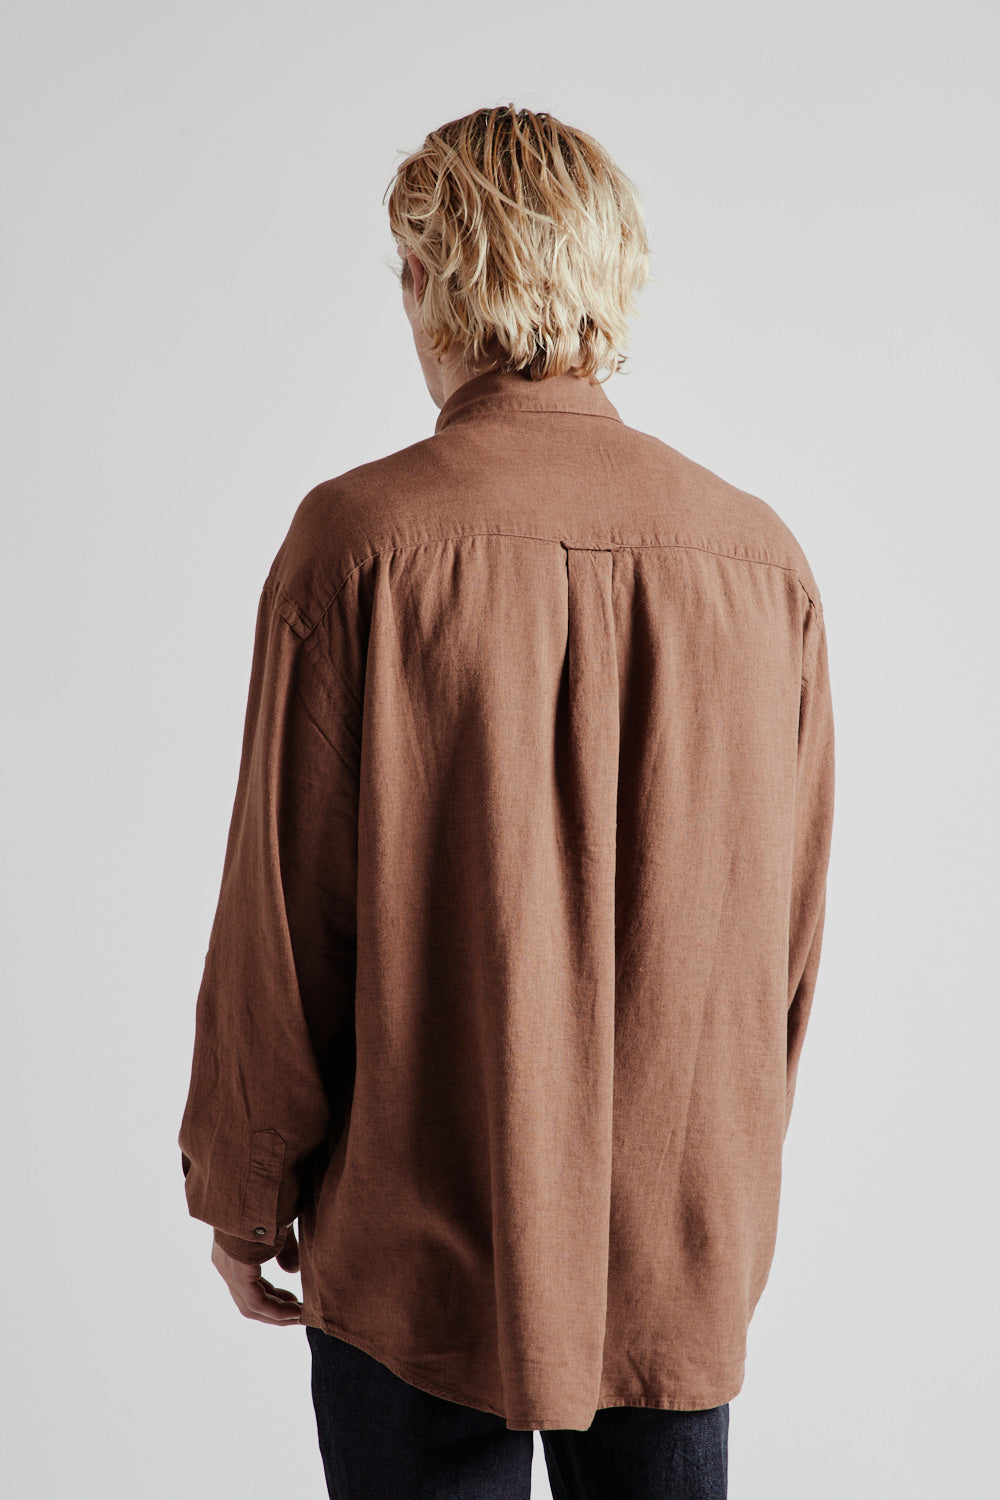 Frizmworks Silky Linen Relaxed Shirt in Brown